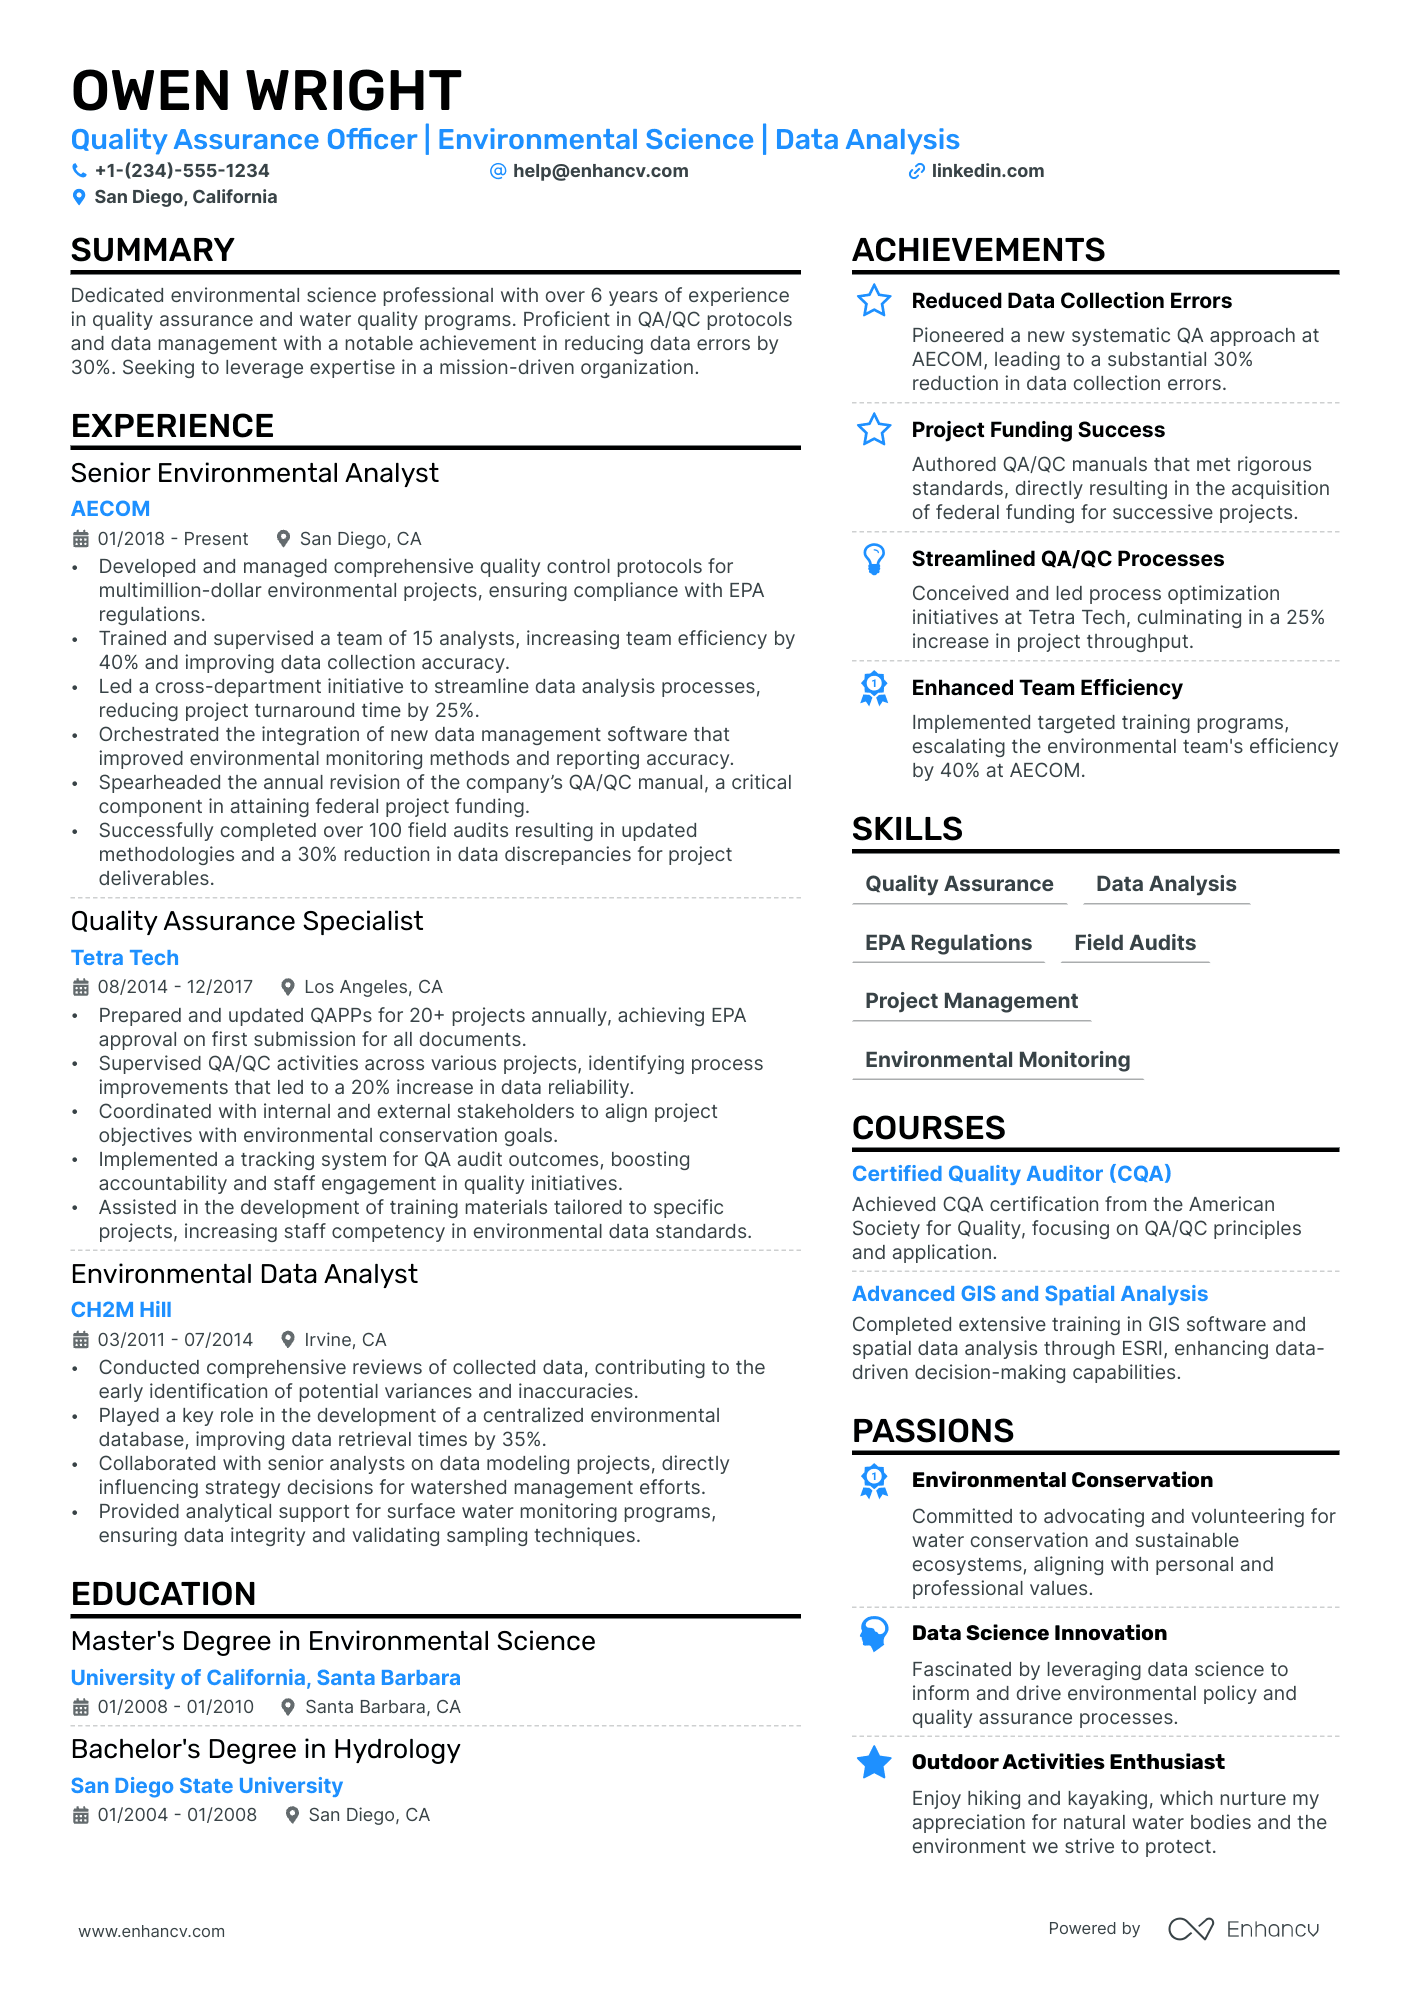 Quality Assurance Officer resume example